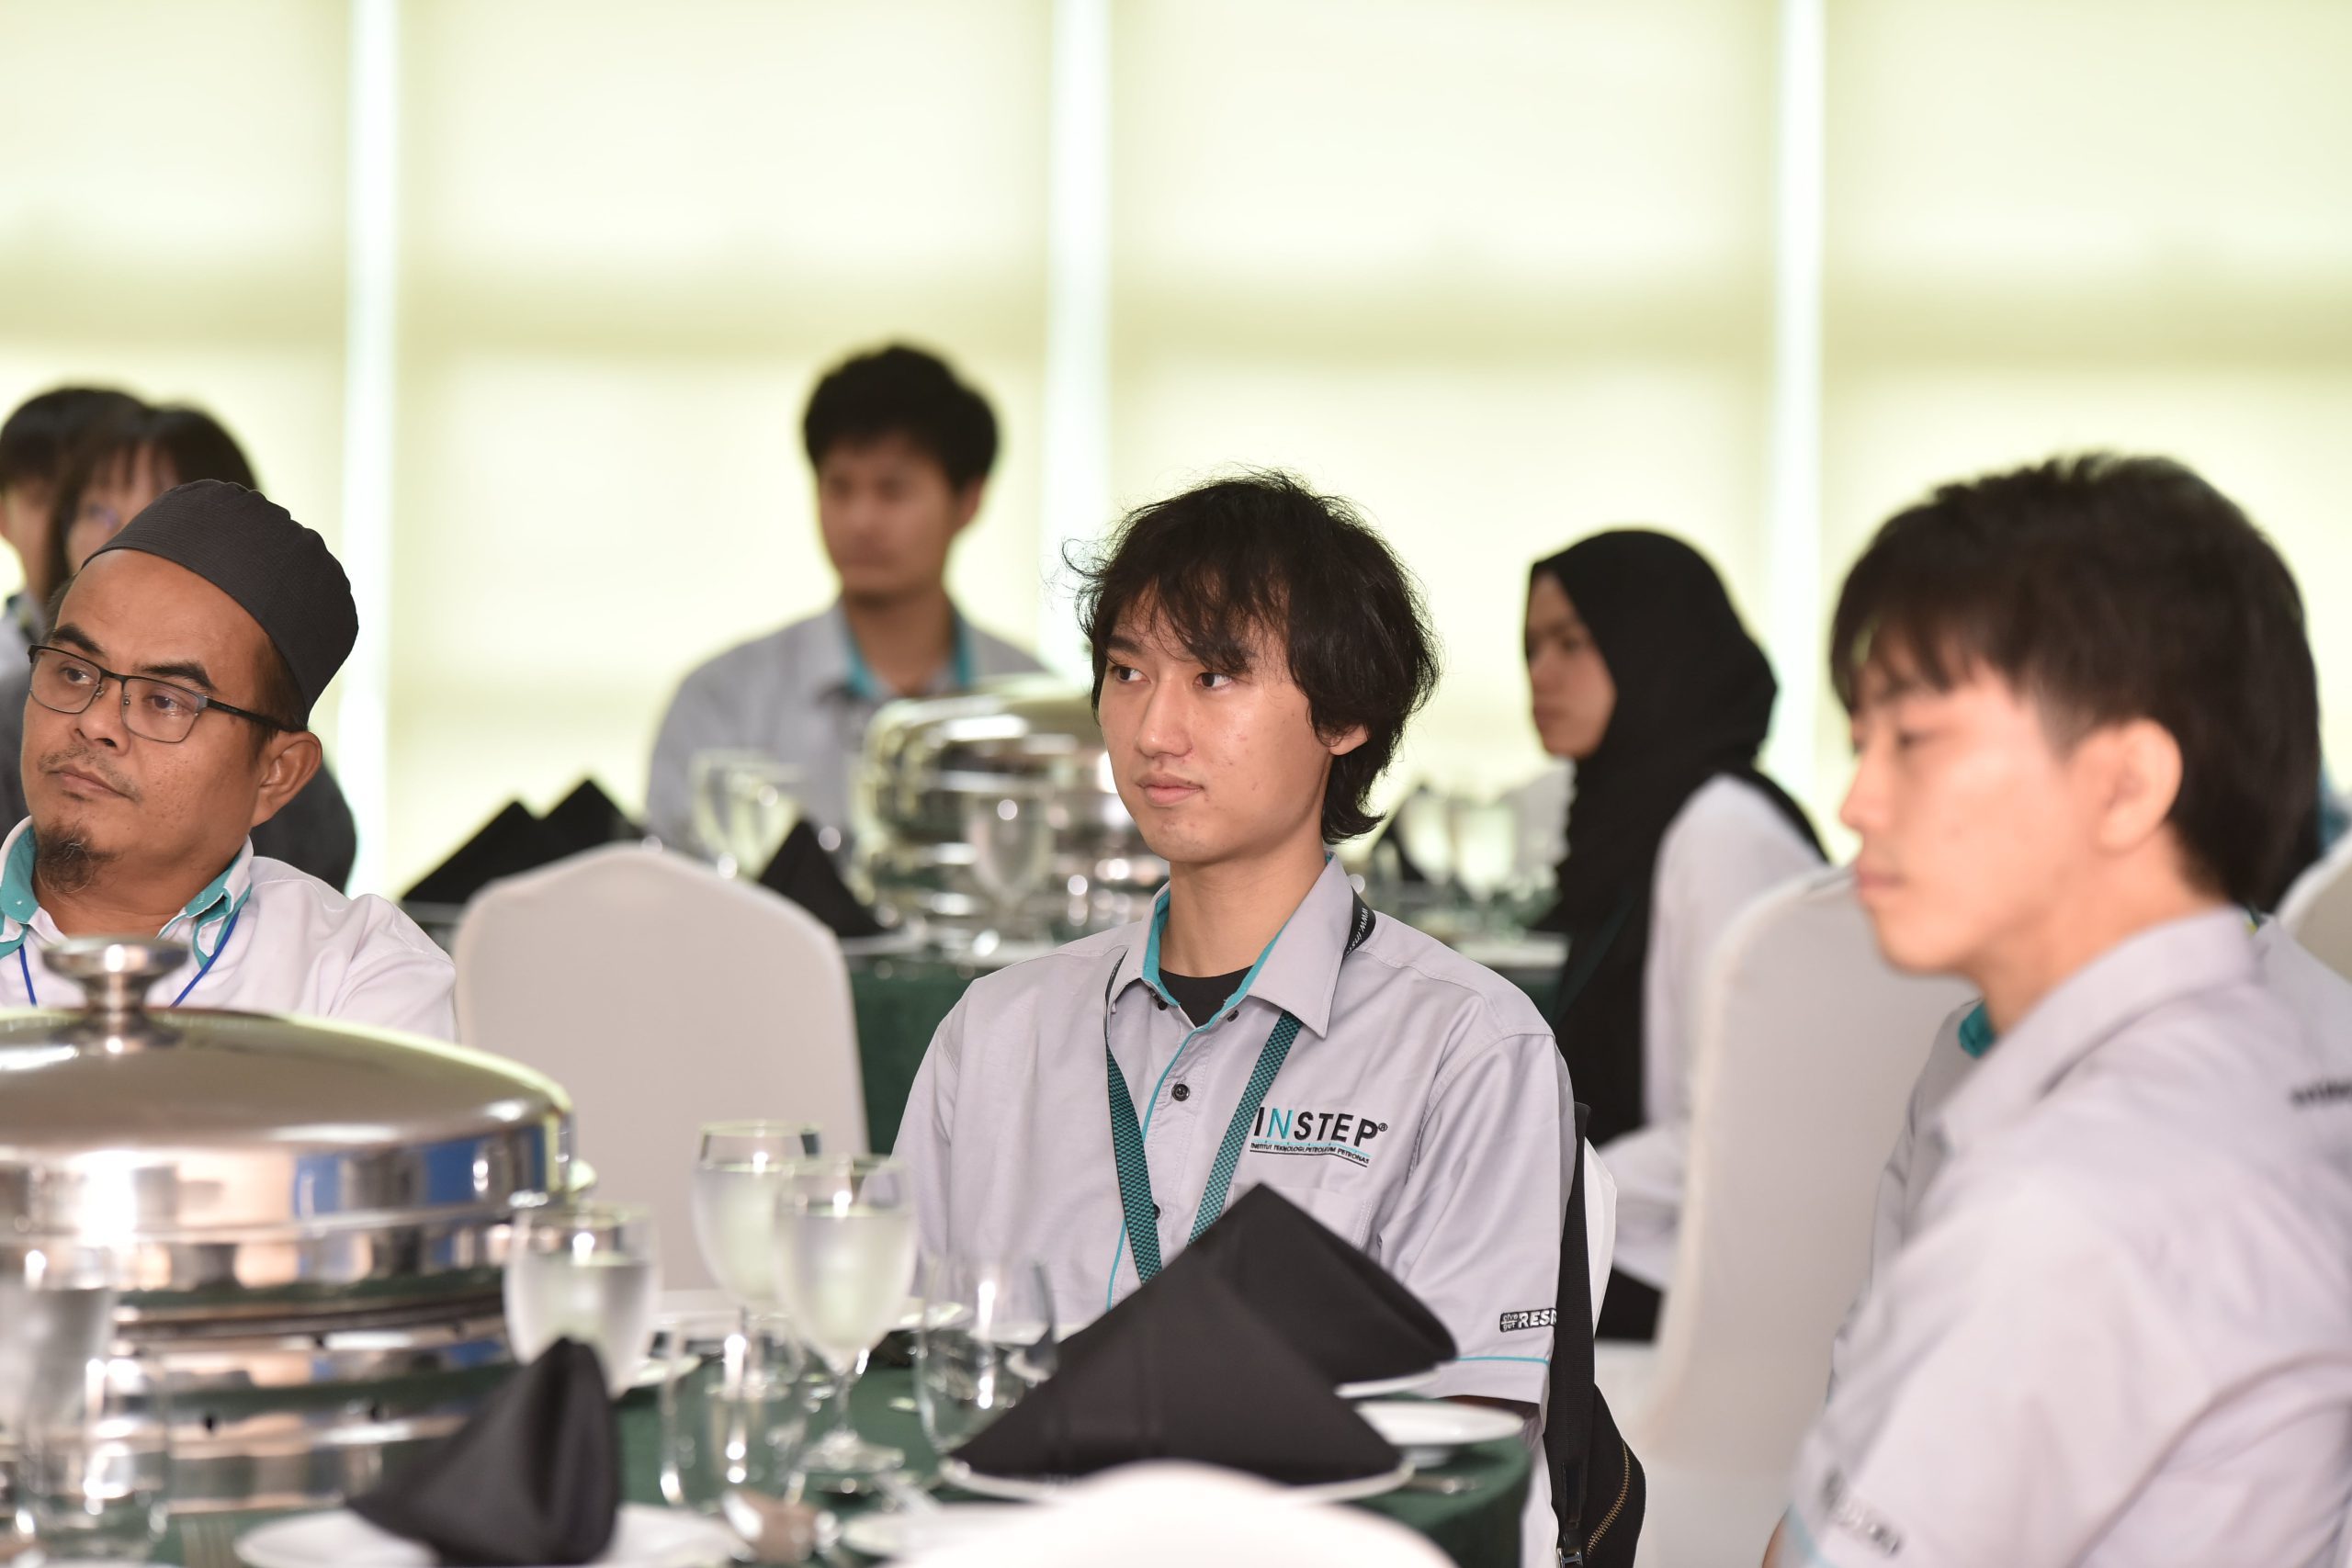 A look of determination on the faces of our international learners.